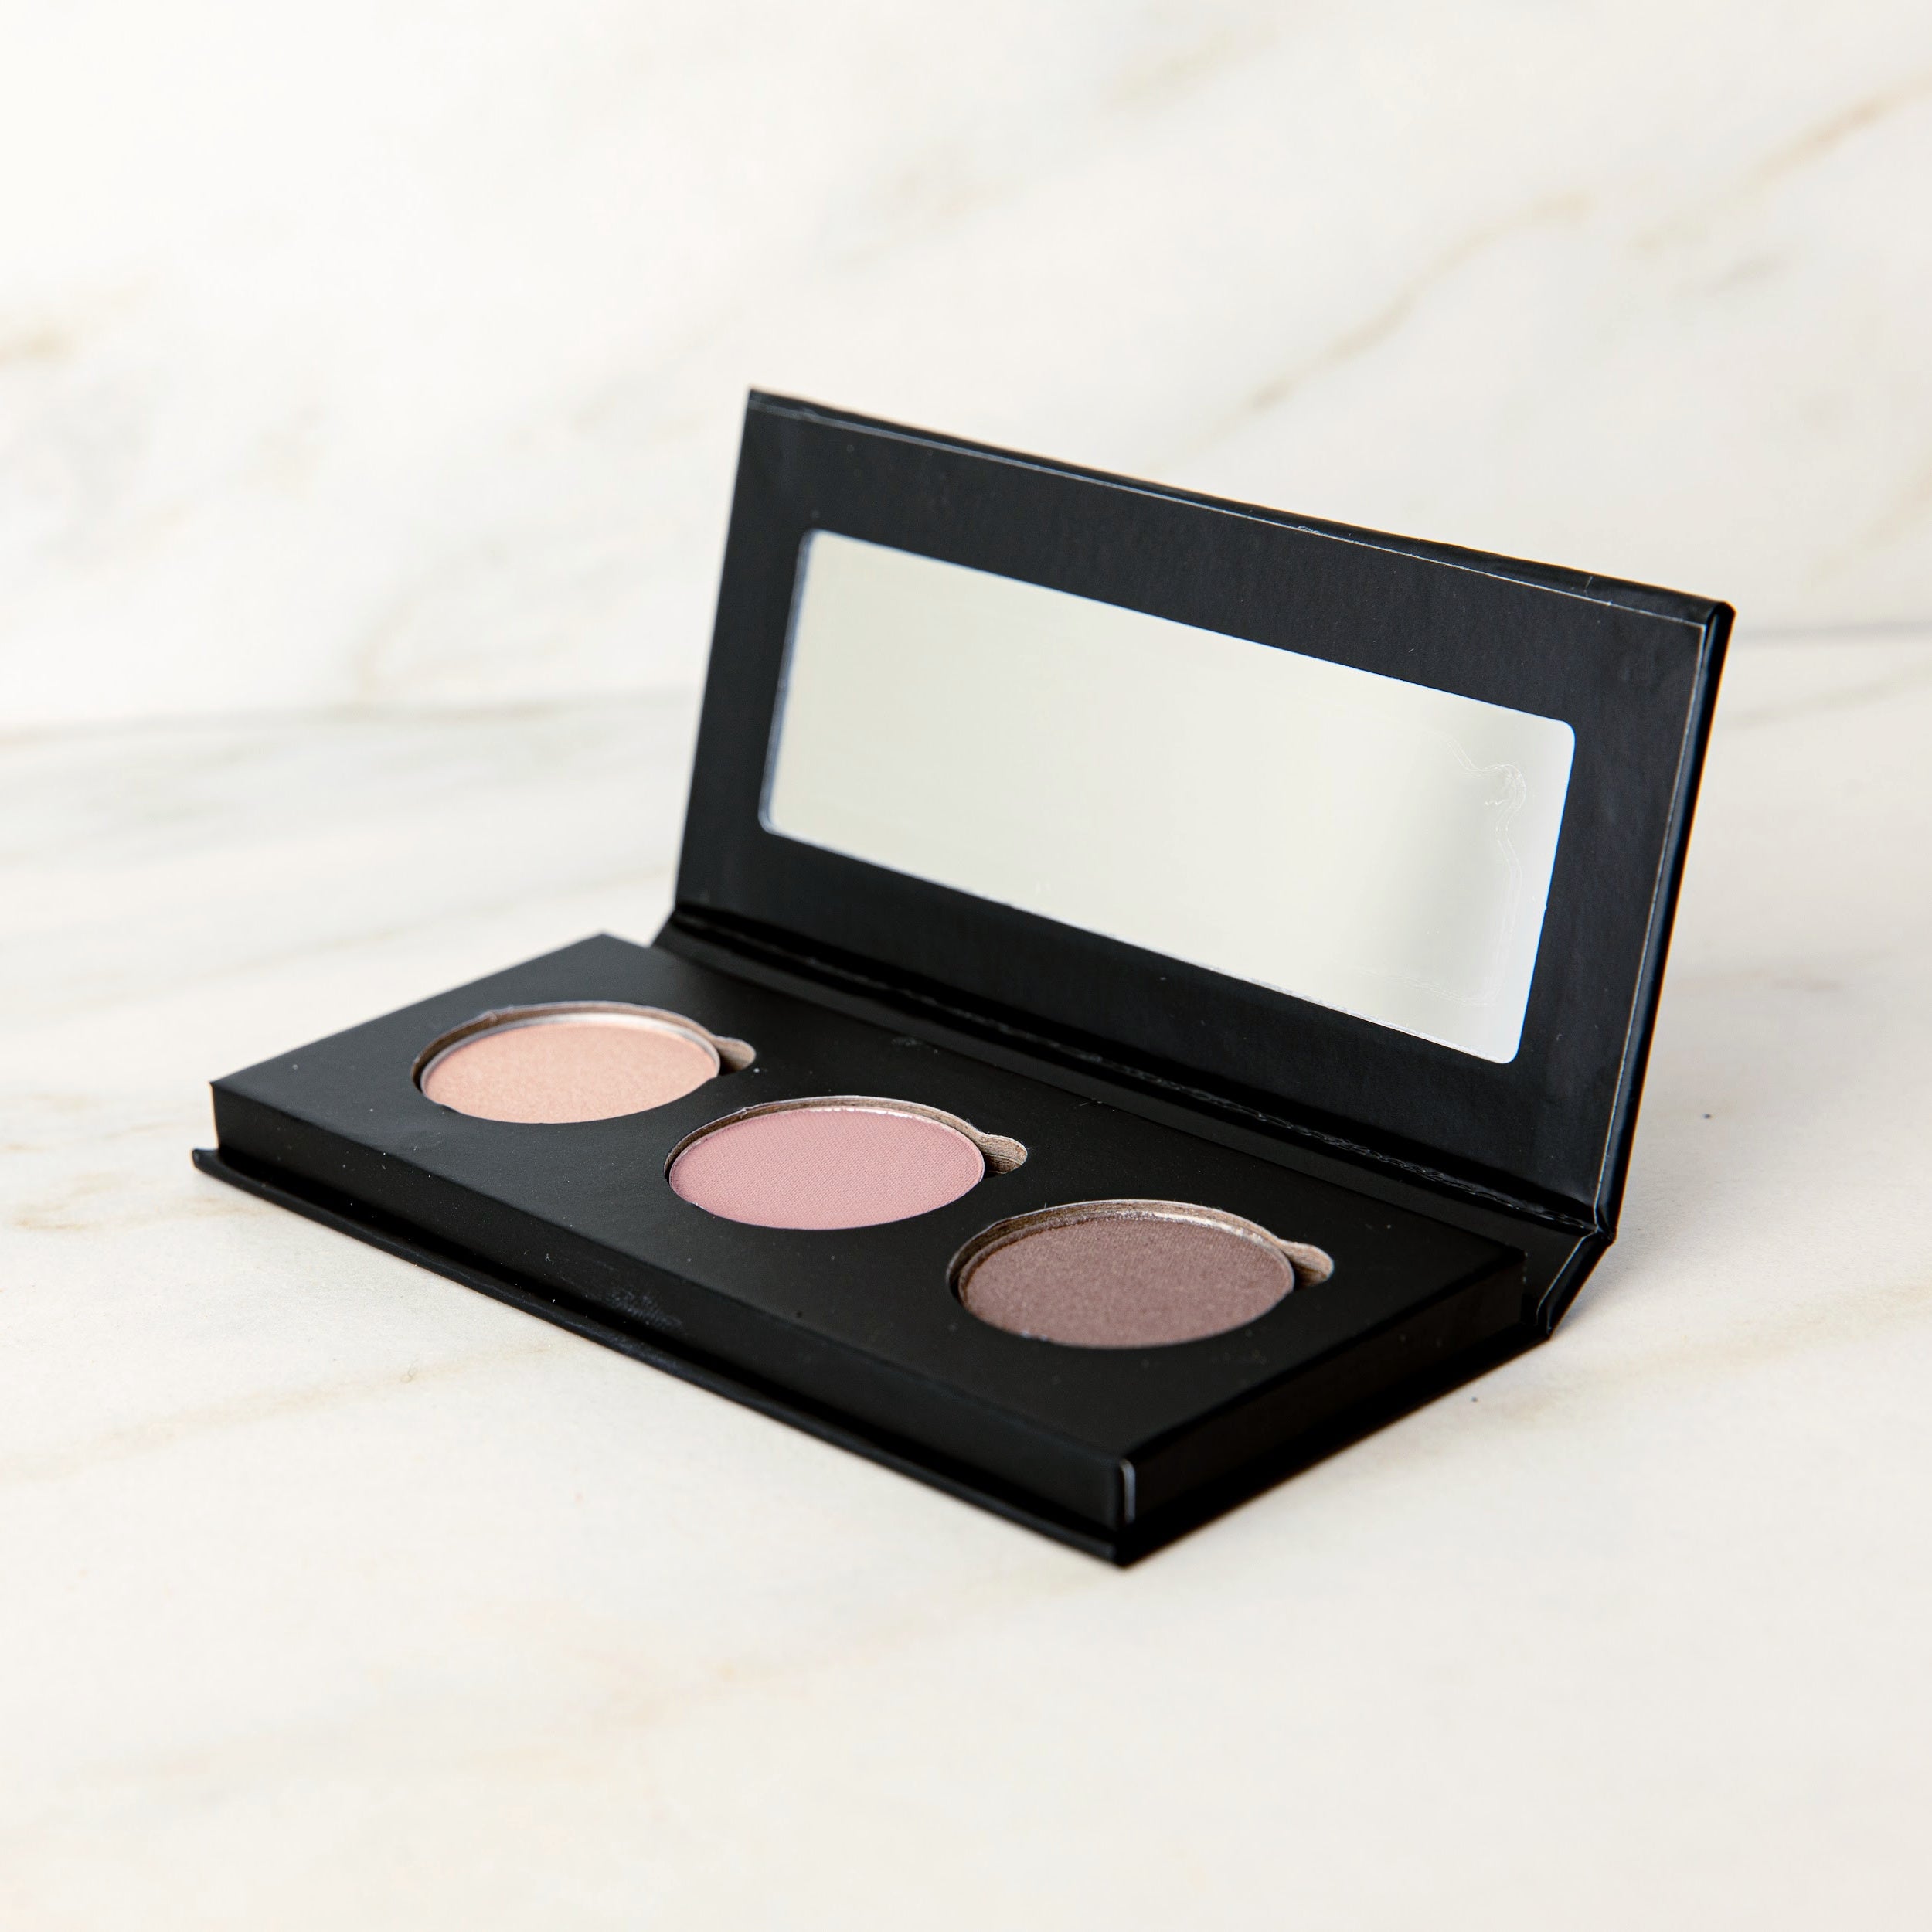 Natural Eye Makeup Toups and – Palette Organics Co